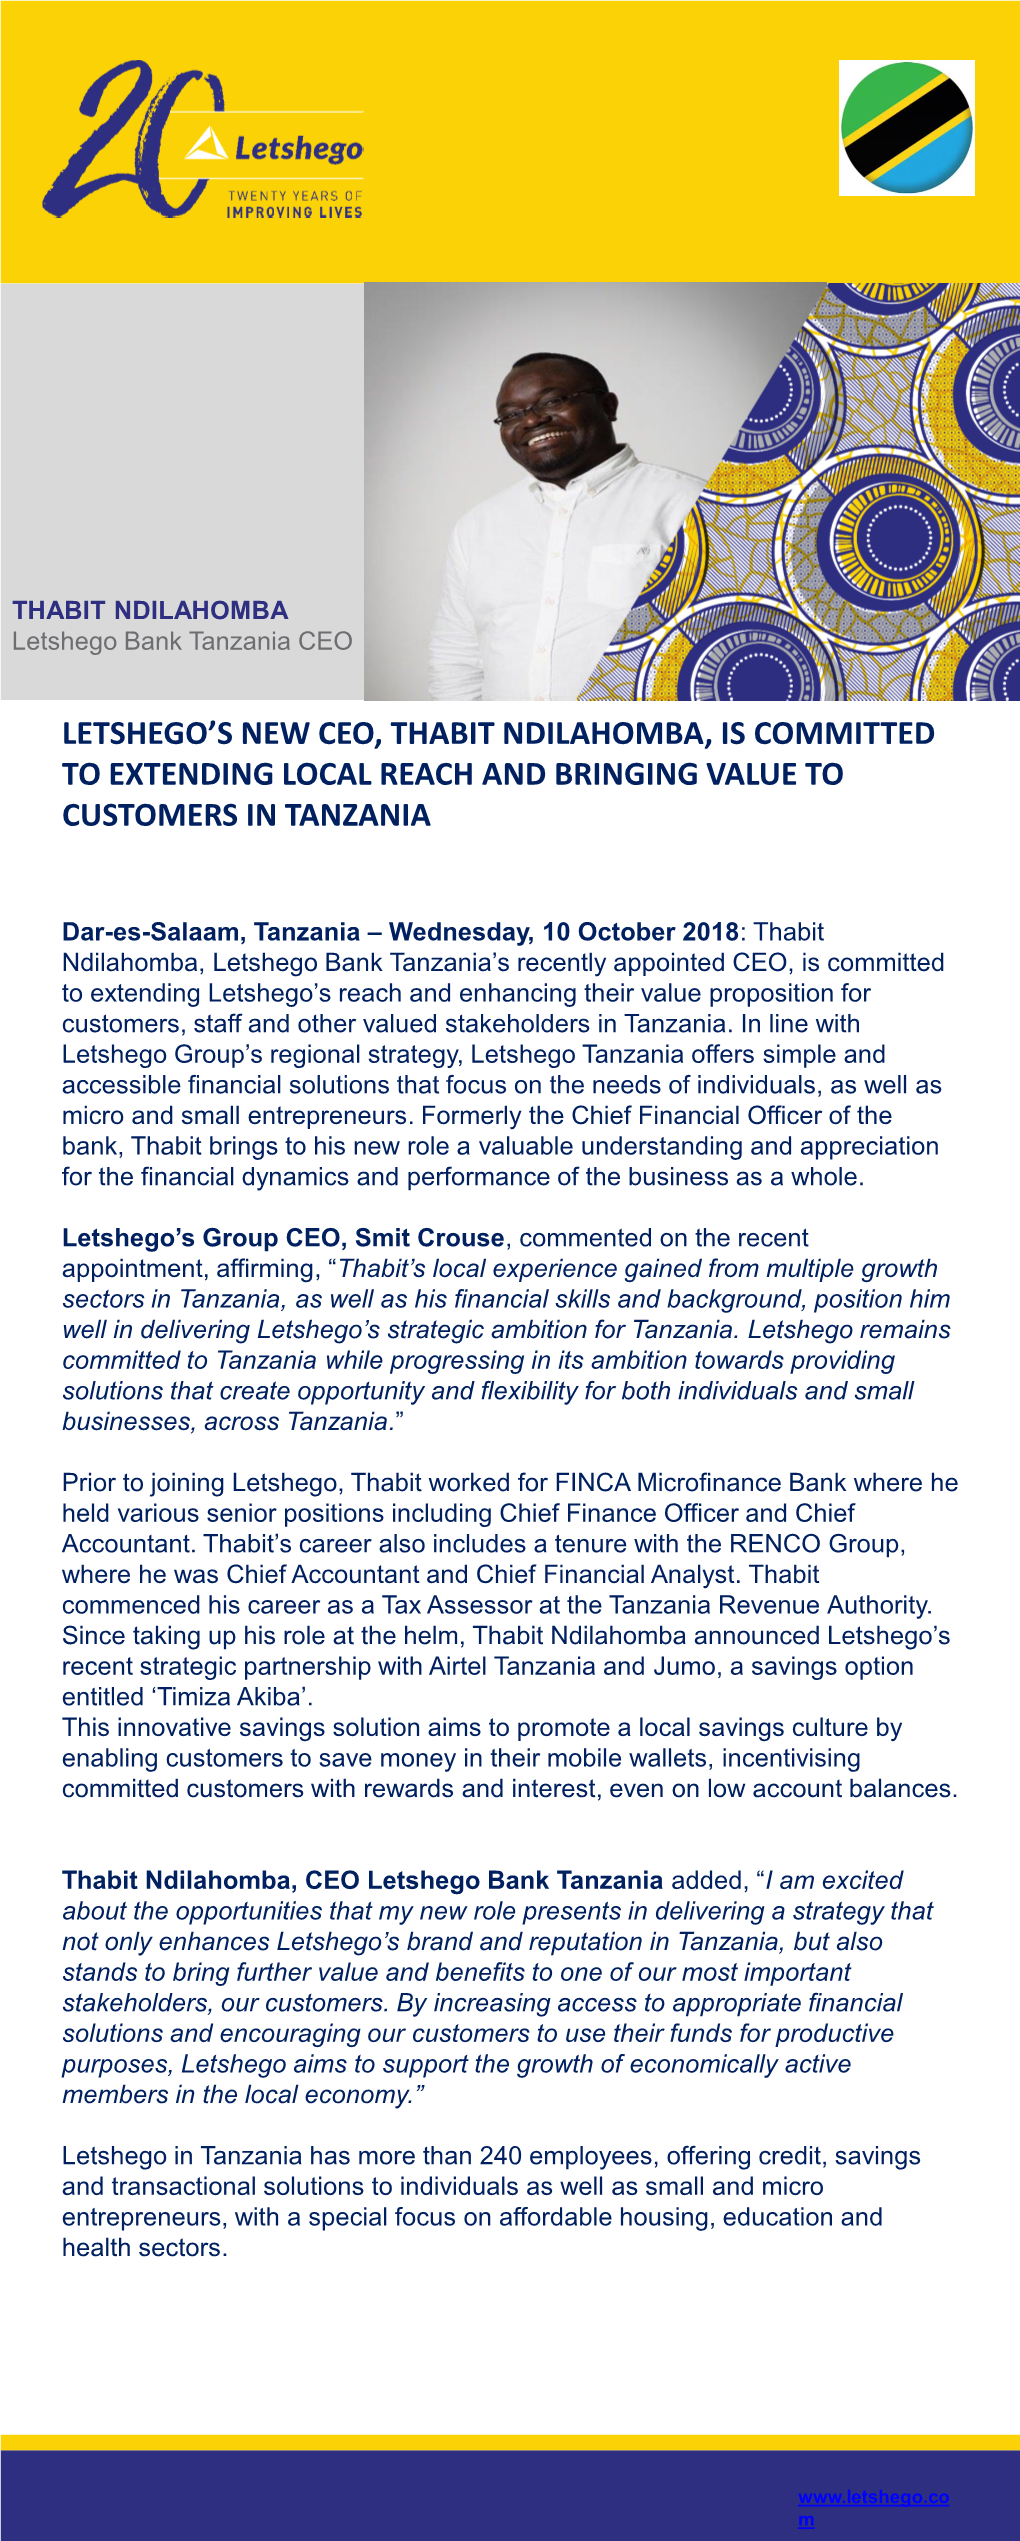 Letshego's New Ceo, Thabit Ndilahomba, Is Committed to Extending Local Reach and Bringing Value to Customers in Tanzania